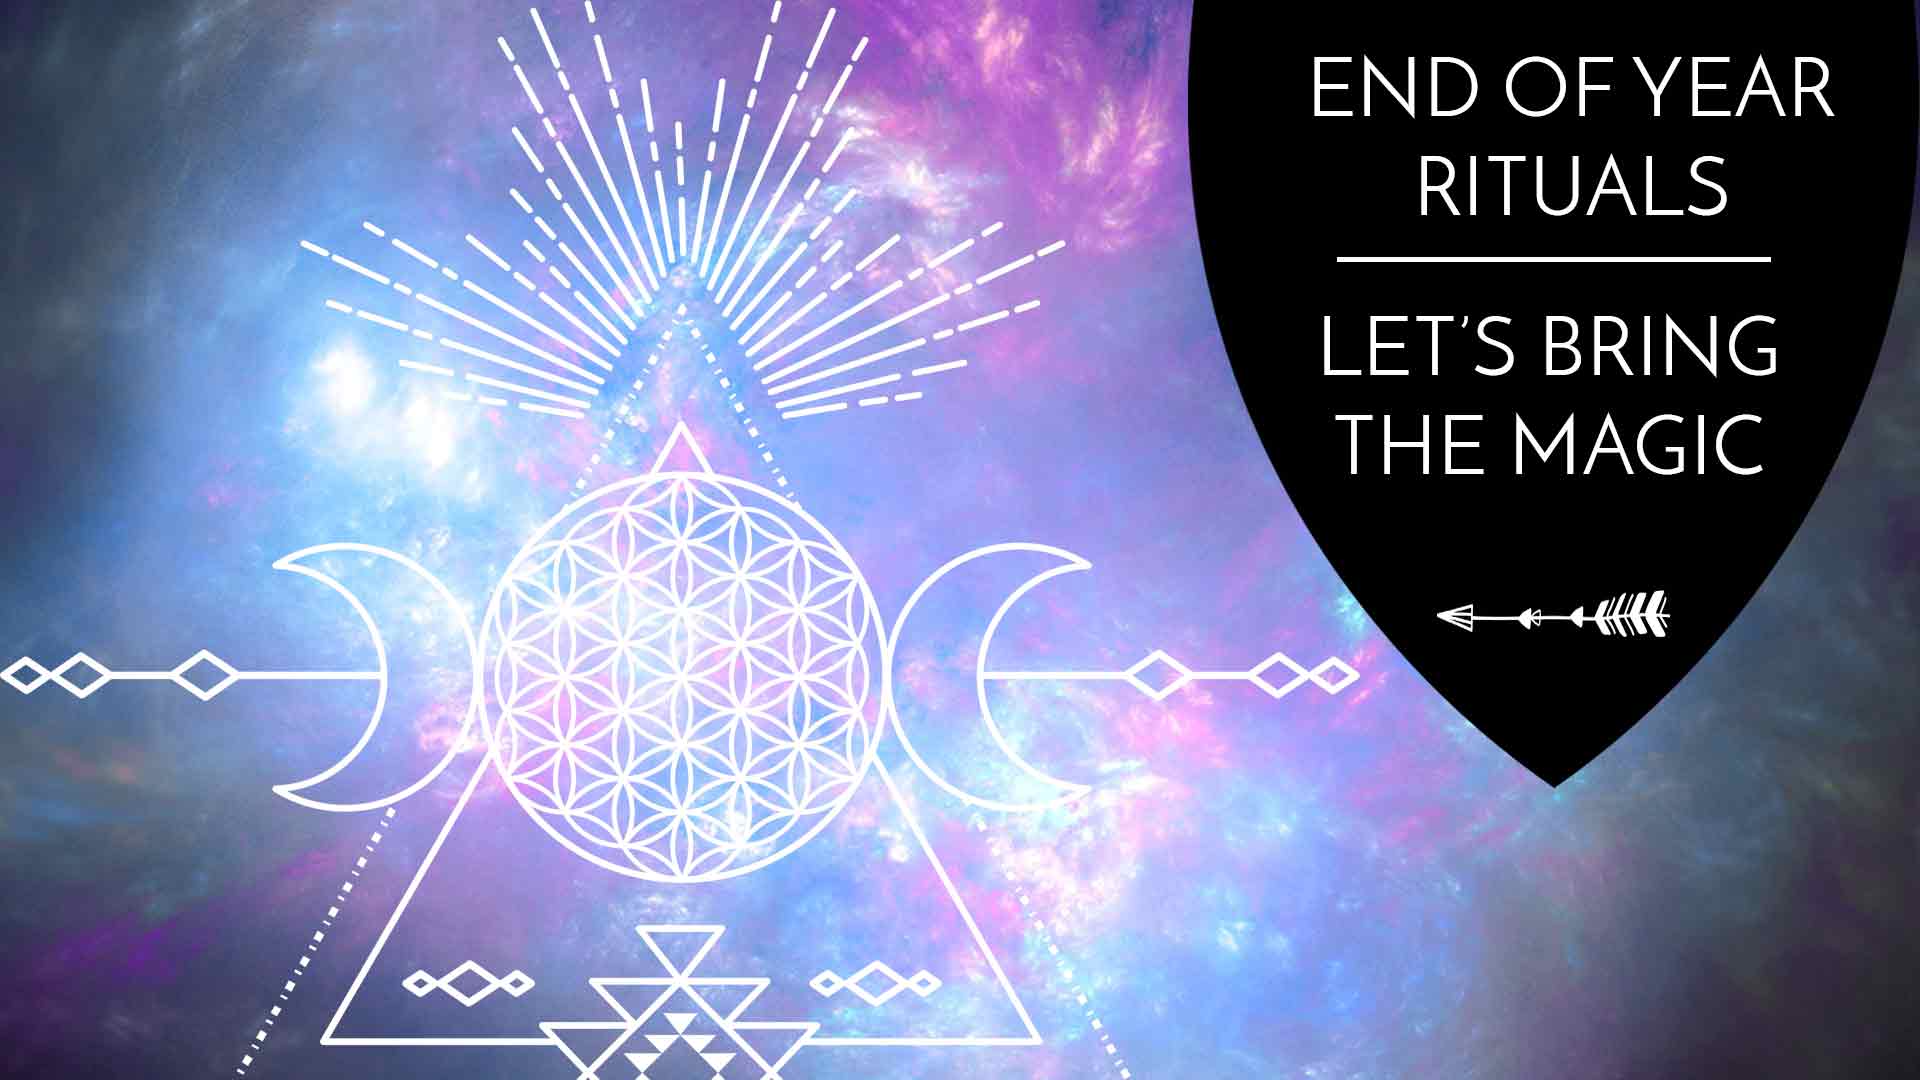 Rituals to end the year on a high note! - The Awakened State.